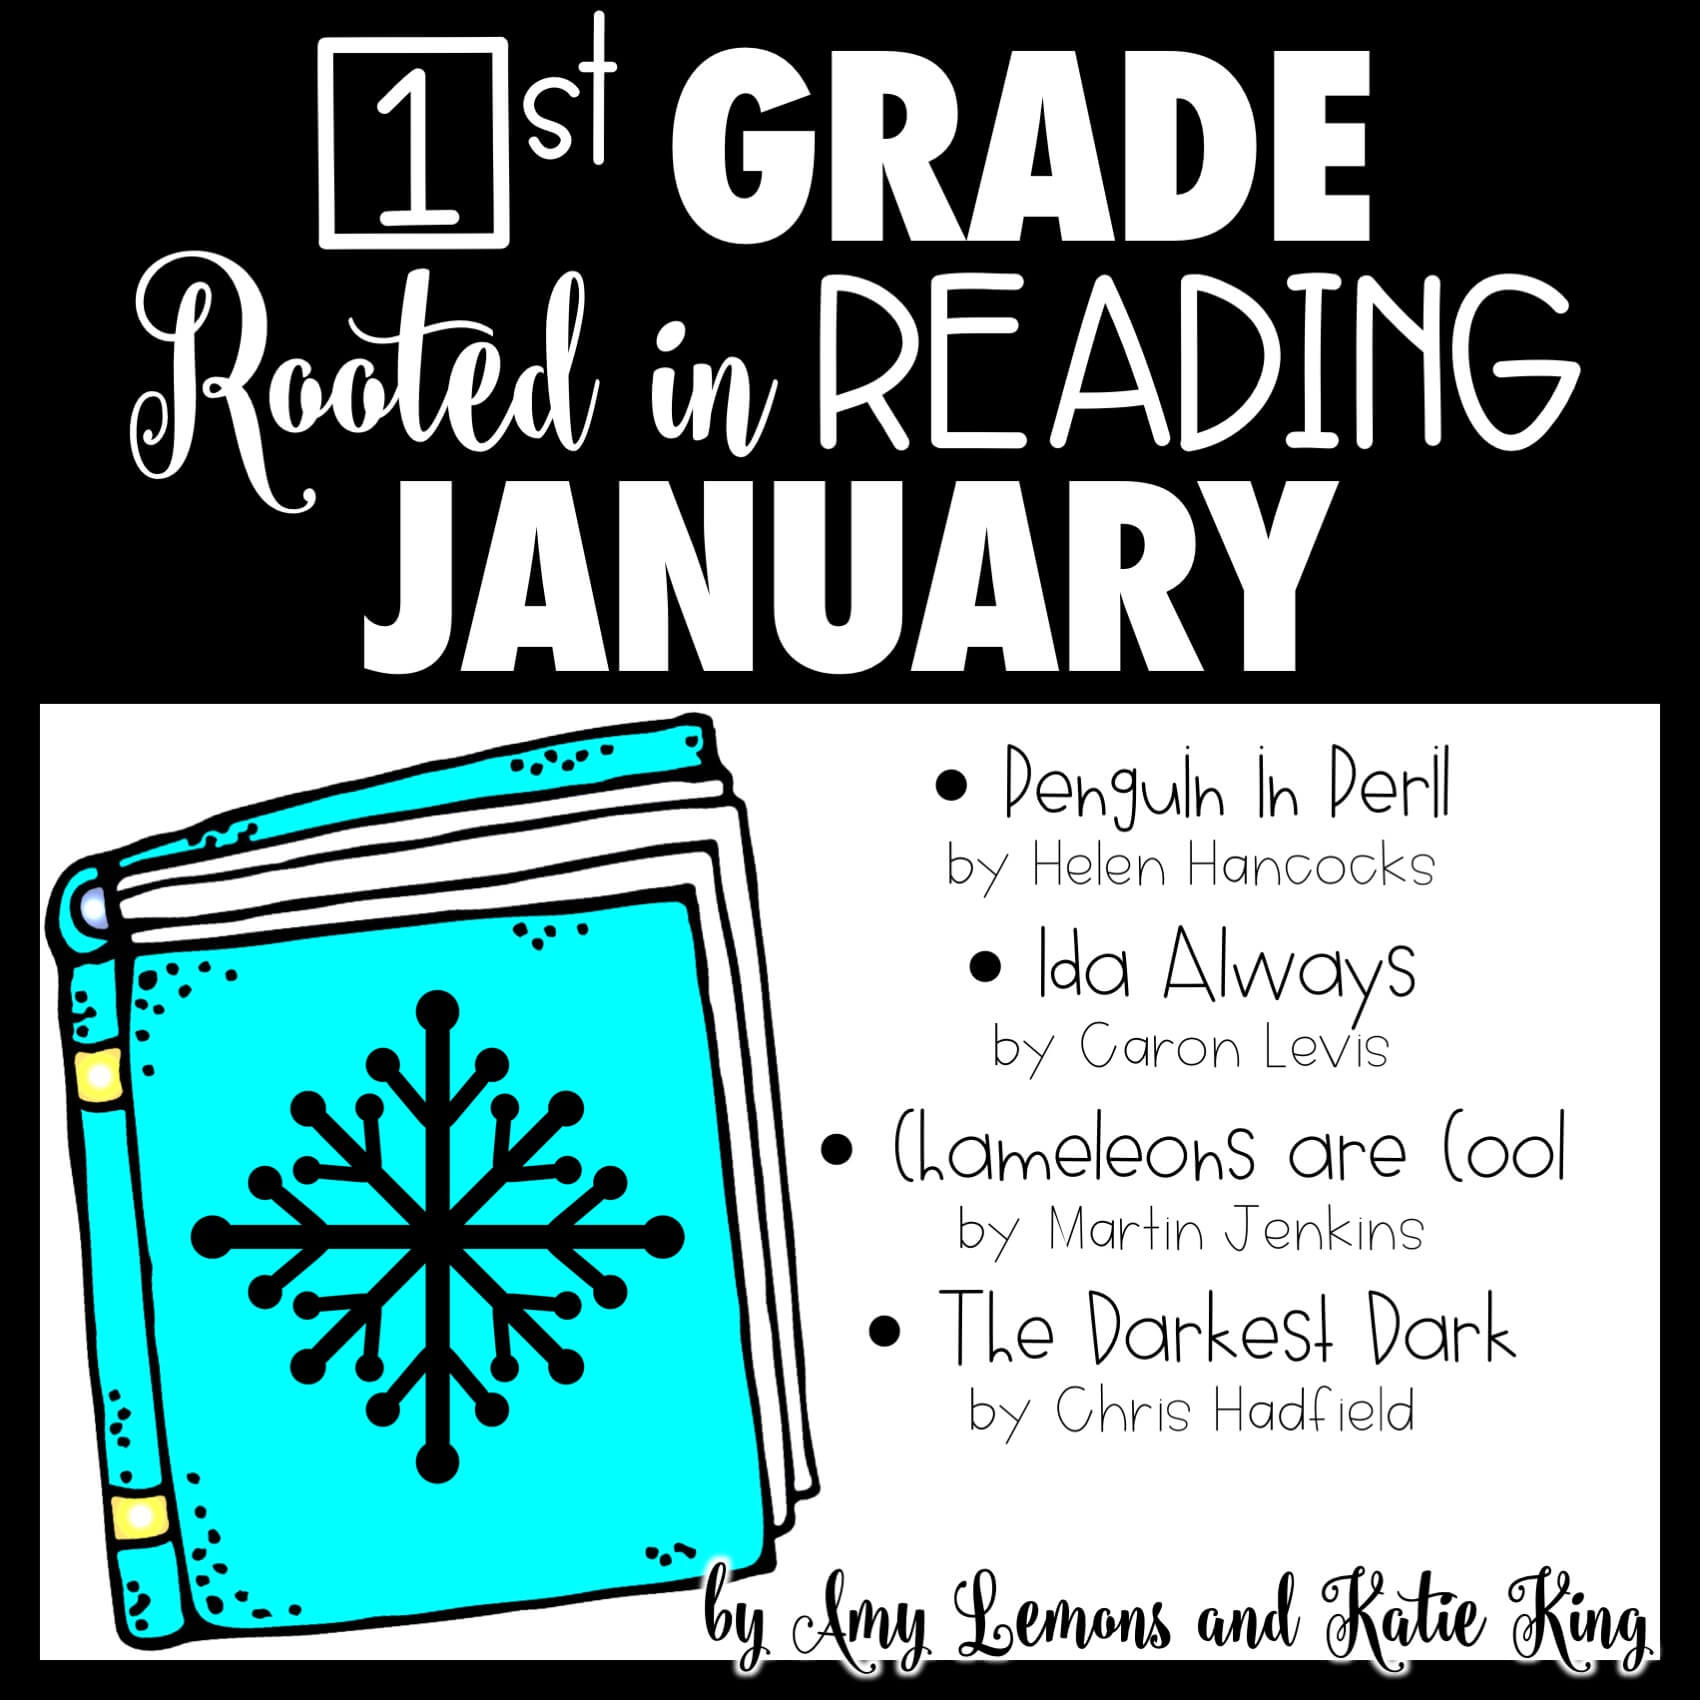 1st Grade Rooted in Reading January